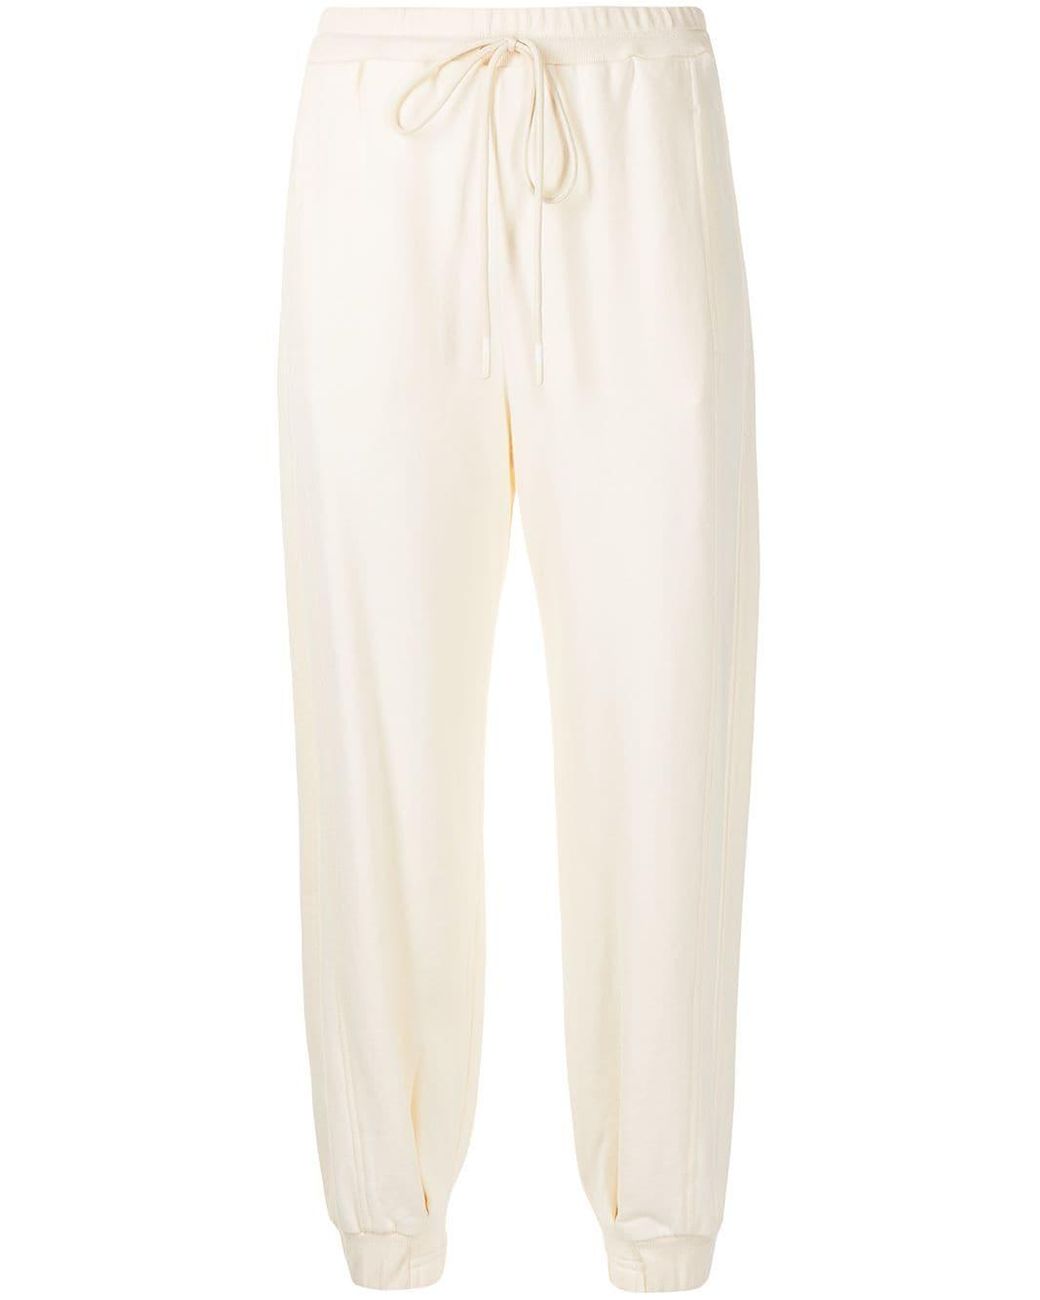 Manning Cartell Drawstring-waist Cotton Trousers in Yellow - Lyst